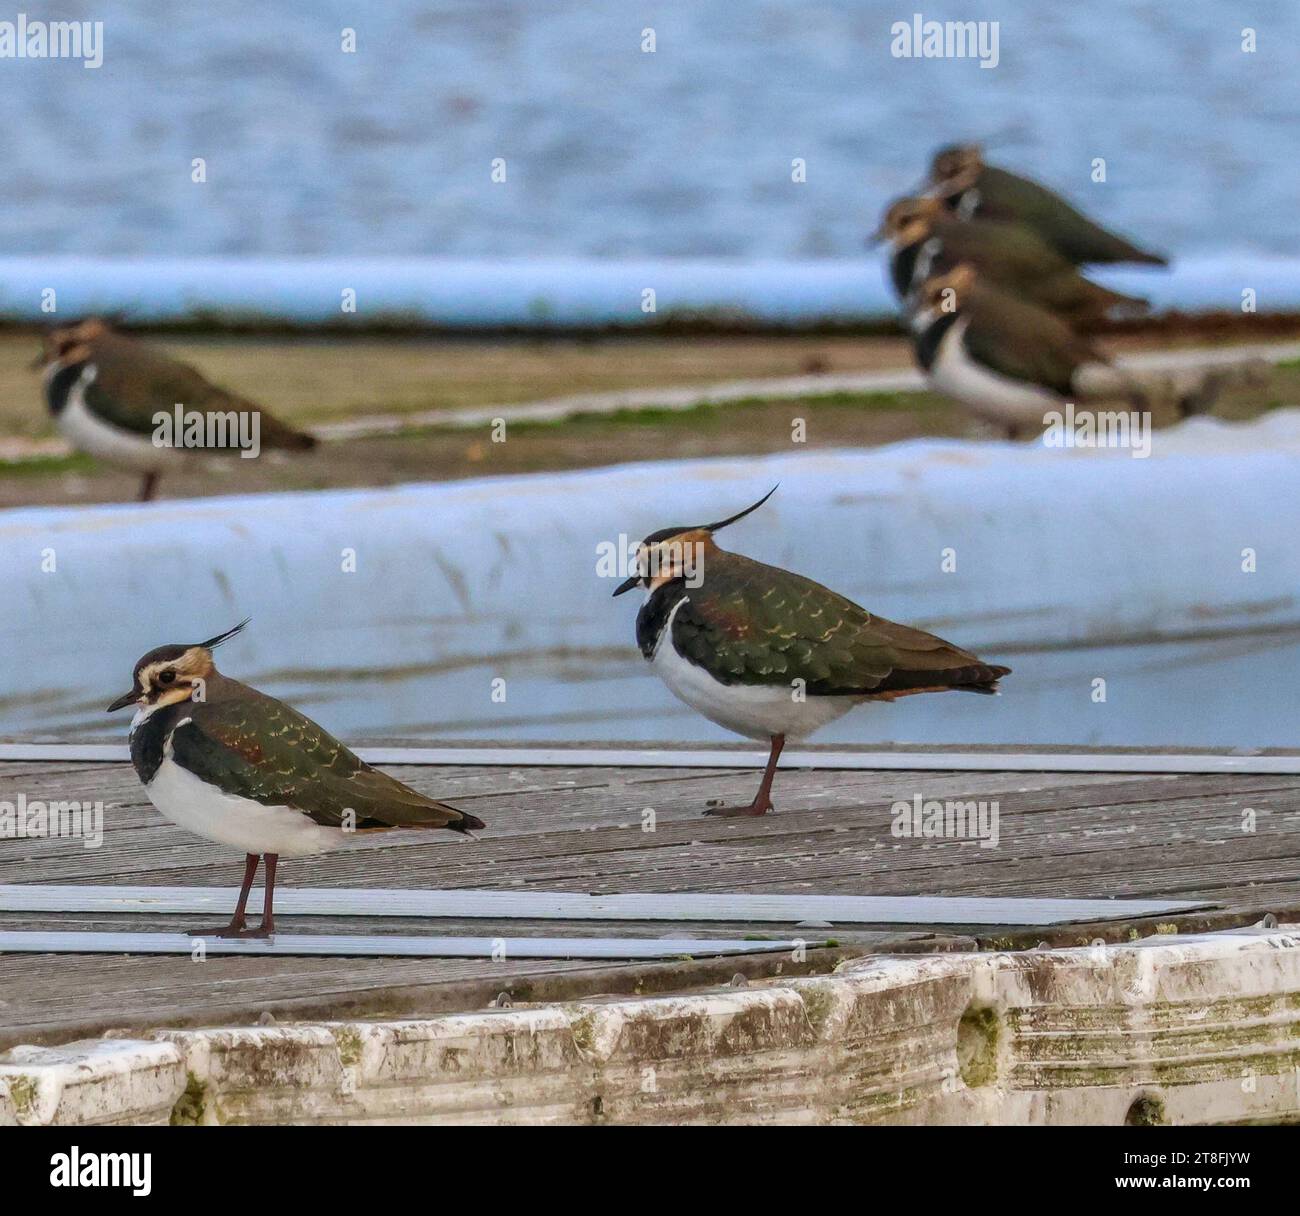 Craigavon, County Armagh, Northern Ireland, UK. 20th Nov 2023. UK weather - a dry day but cold in the moderate north-westerly breeze. A flock of lapwings stand head-on to the north-westerly breeze at the South Lake in Craigavon. Credit: CAZIMB/Alamy Live News. Stock Photo